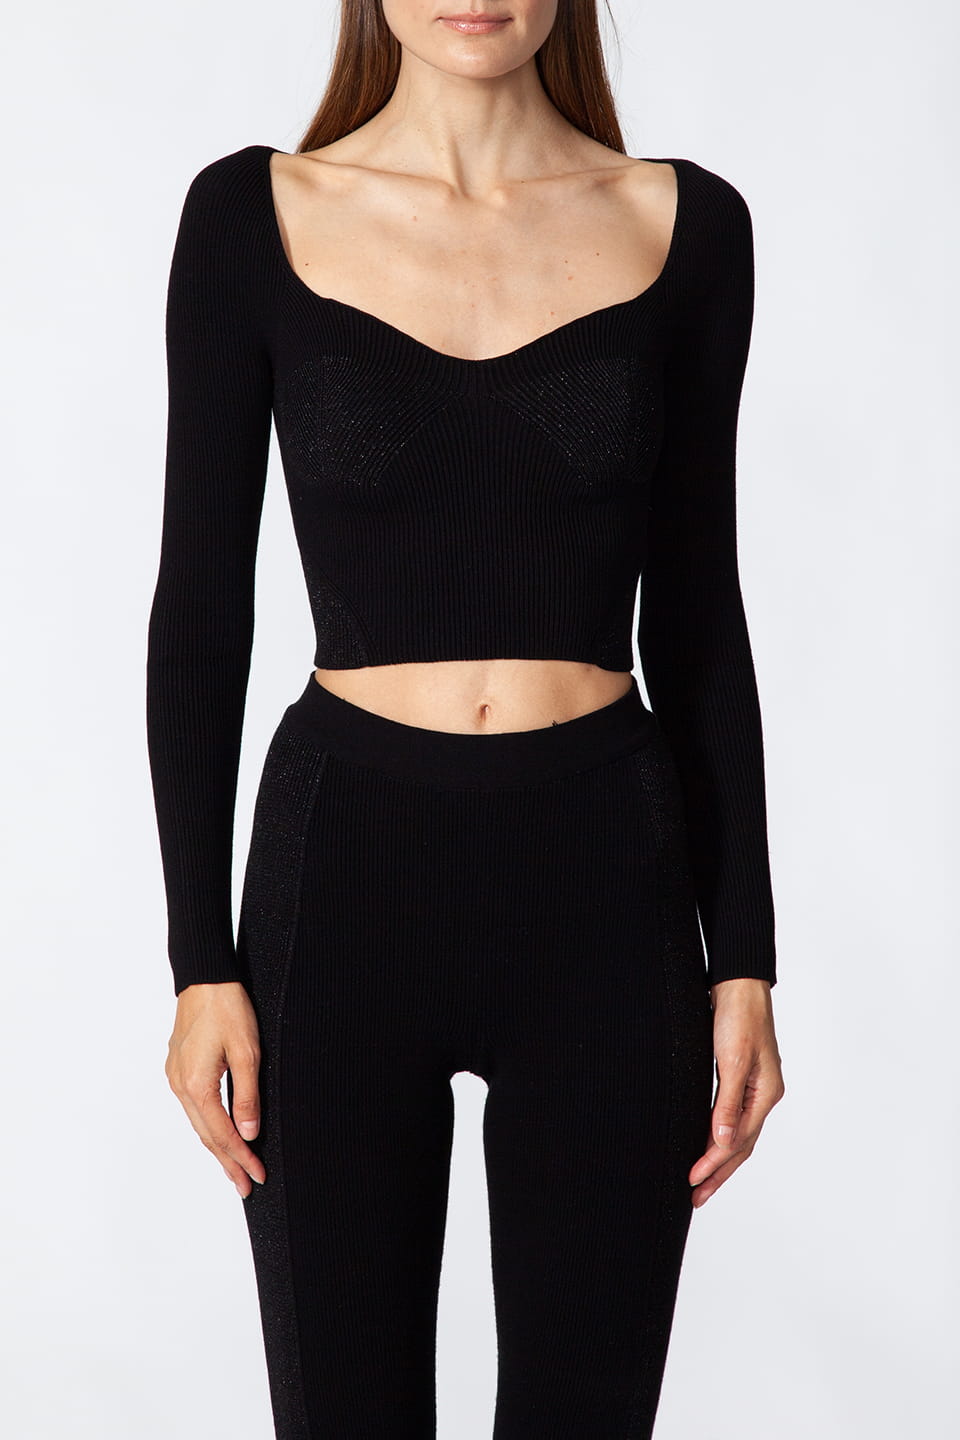 Model posing for front view, wearing stylist Kukhareva London's trendy black top, with cut out neckline and inserts threaded with metallic, shimmering yarn.. Product gallery 1